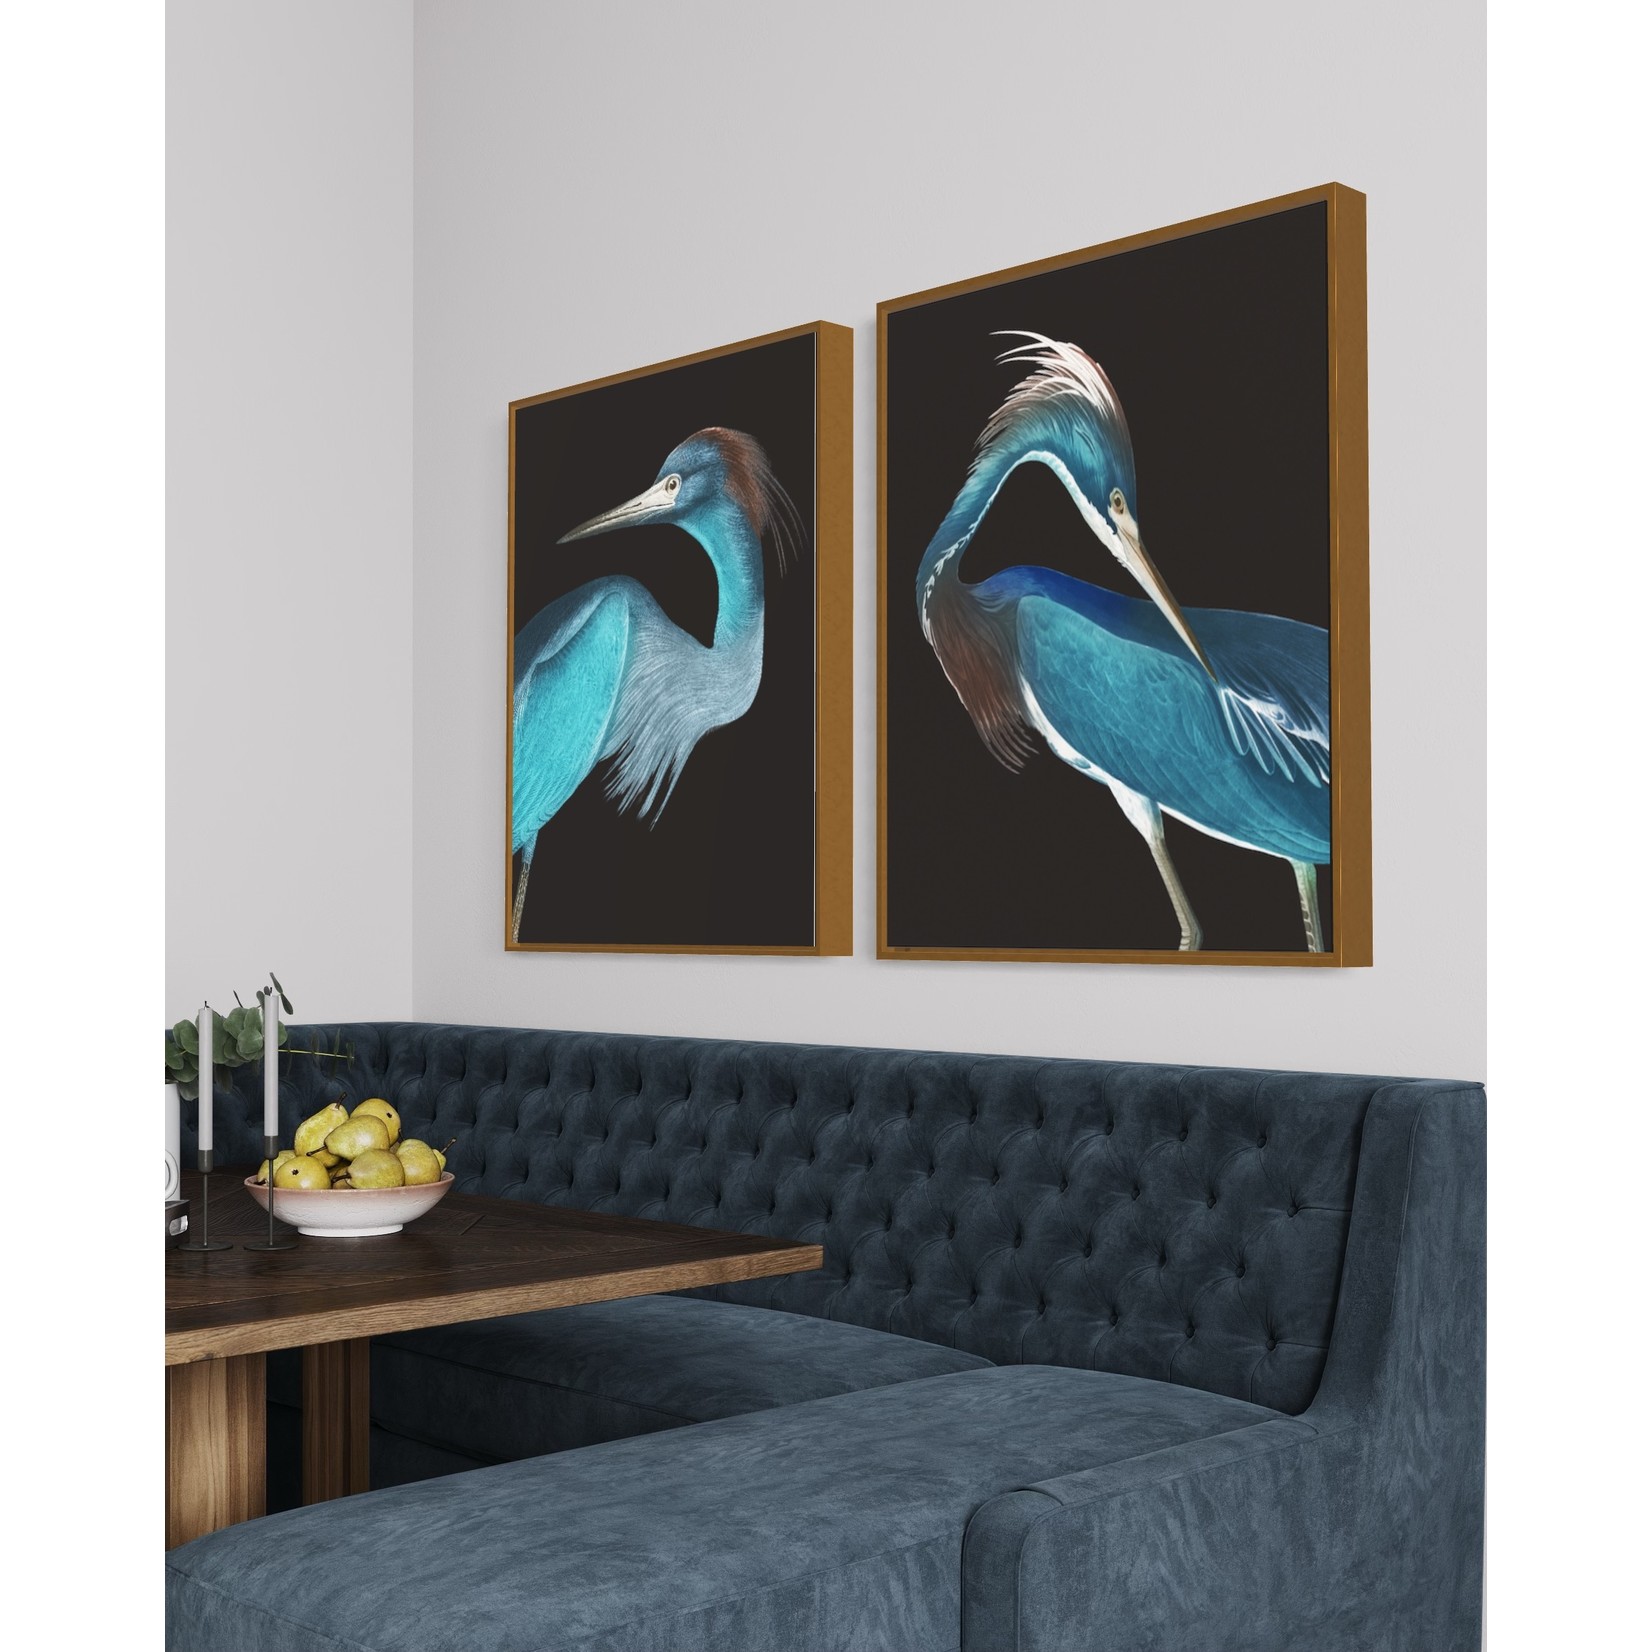 Framed Print on Canvas: Blue Heron ( Rectangular)  Canvas with a Brushed Gold Floater frame  33 x 41 inches high inches